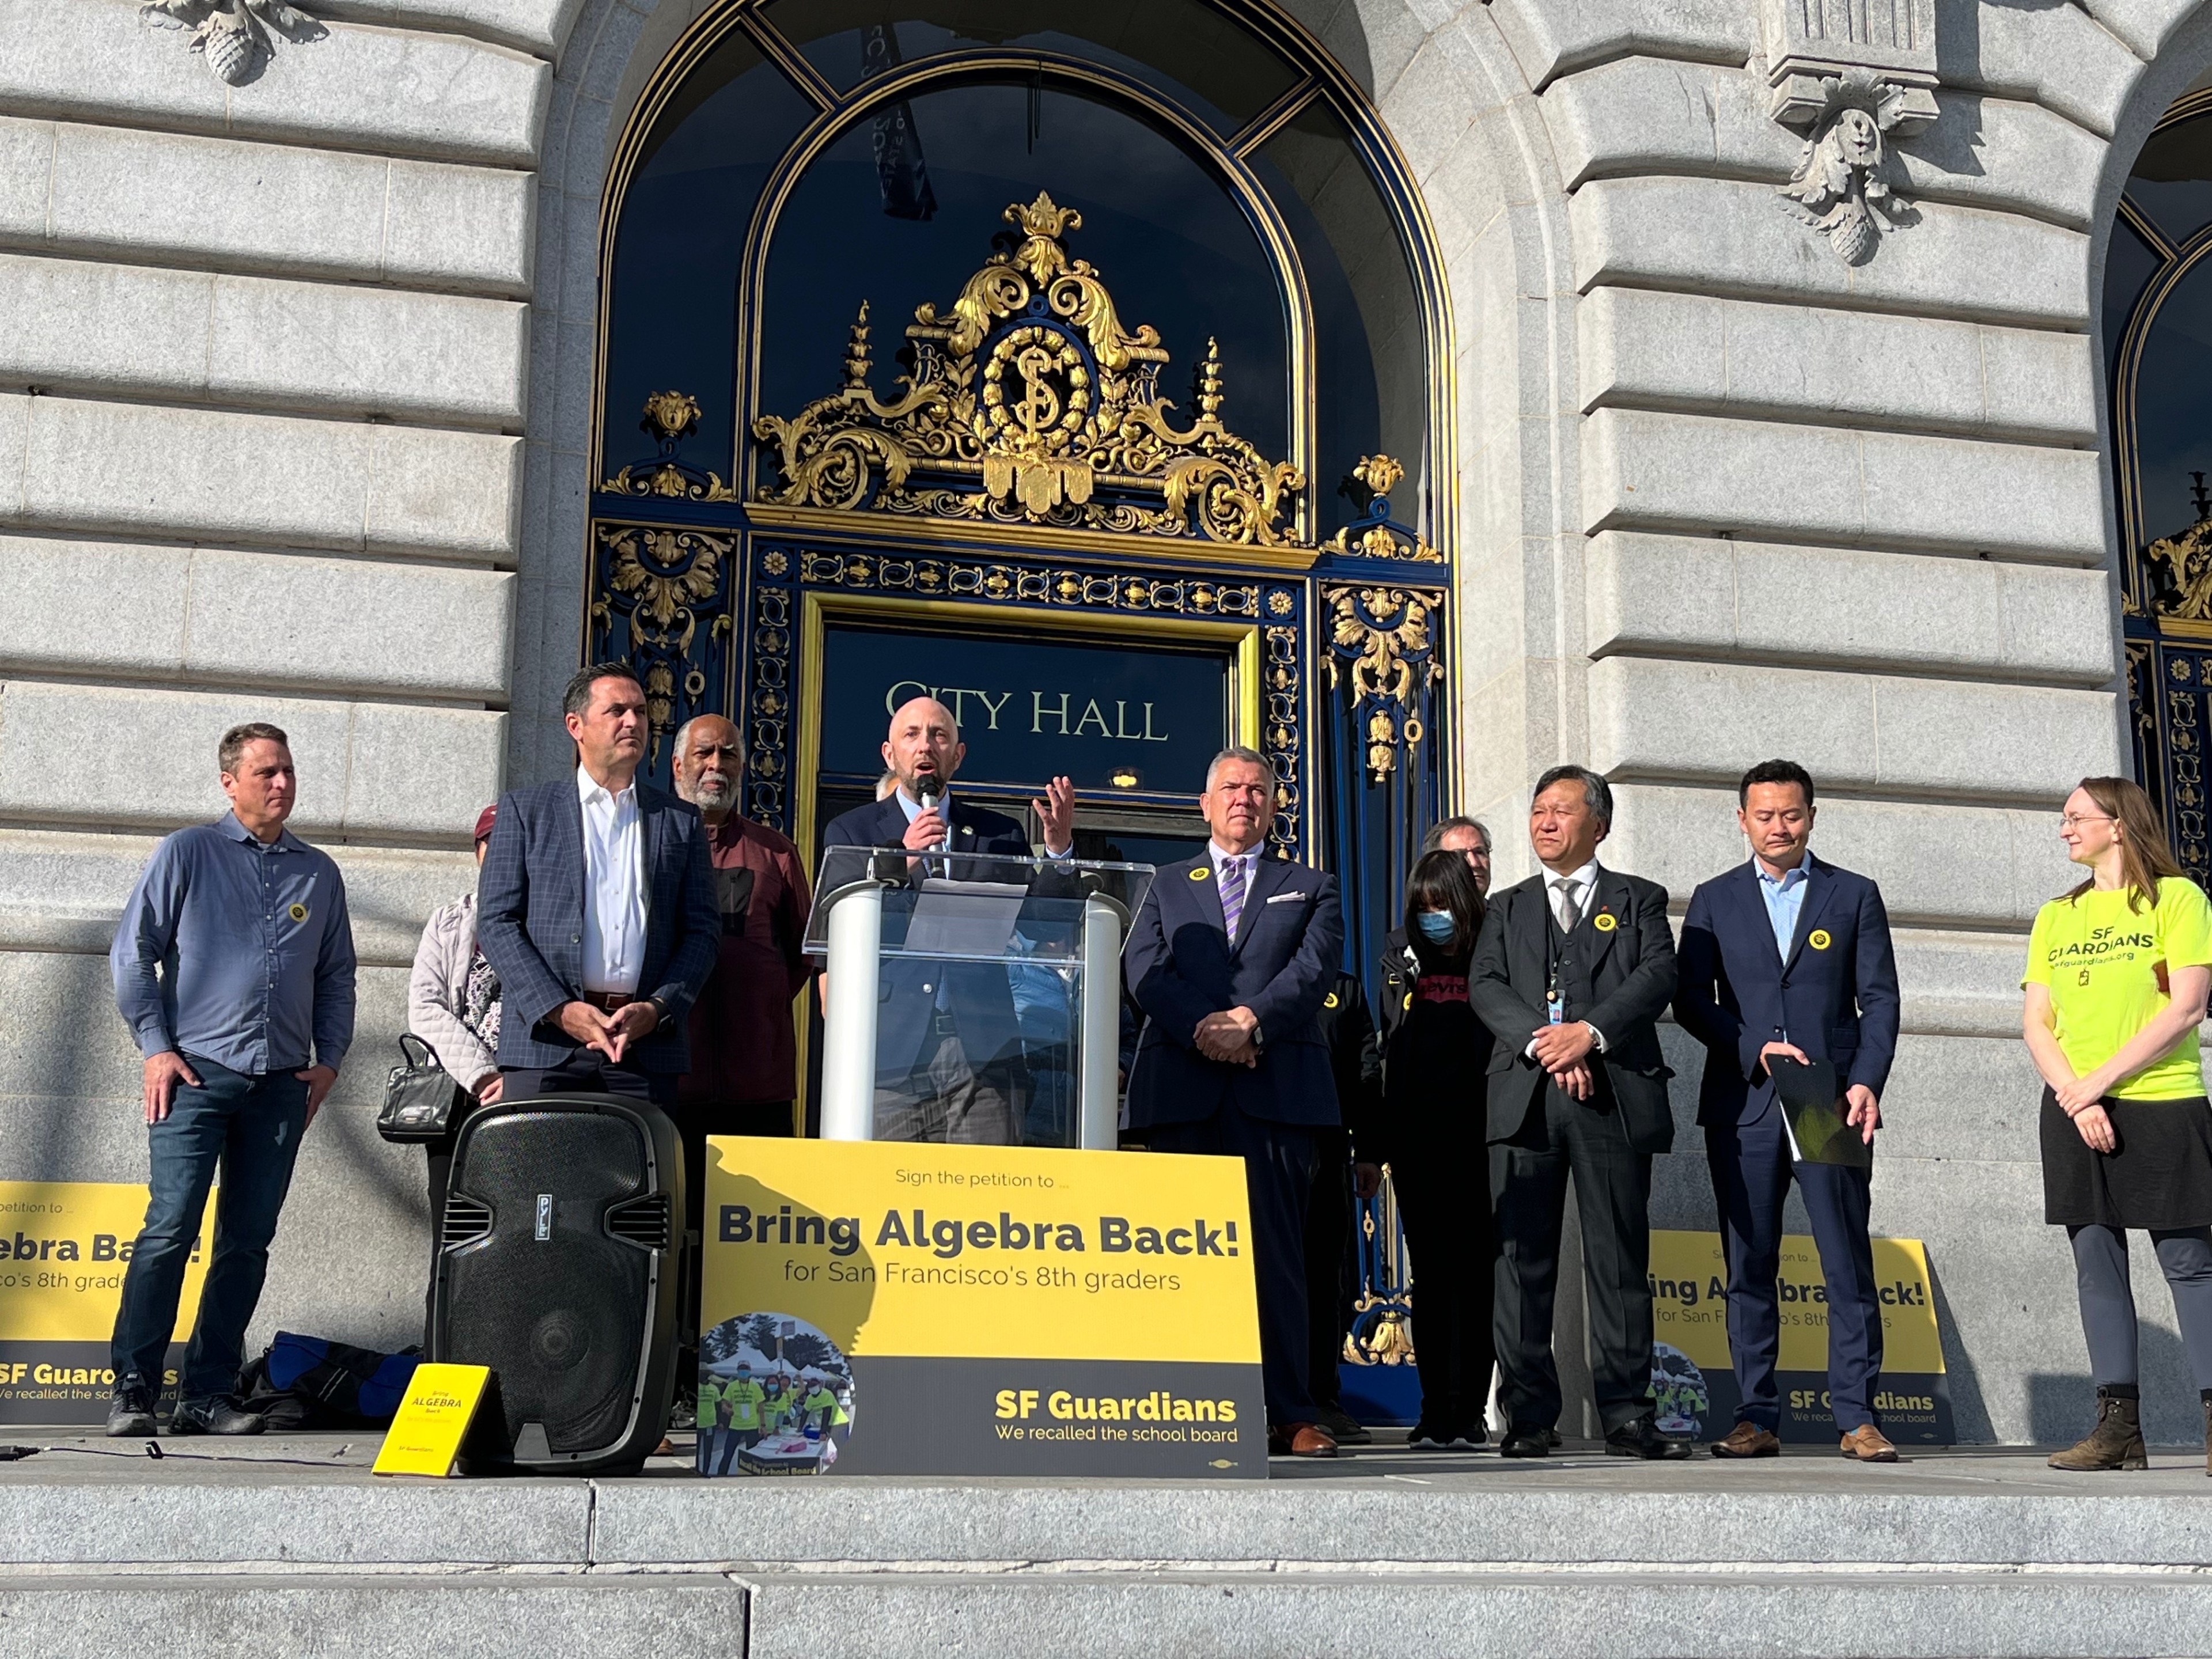 A group of lawmakers and residents rally outside City Hall in support of returning algebra to San Francisco middle schools.